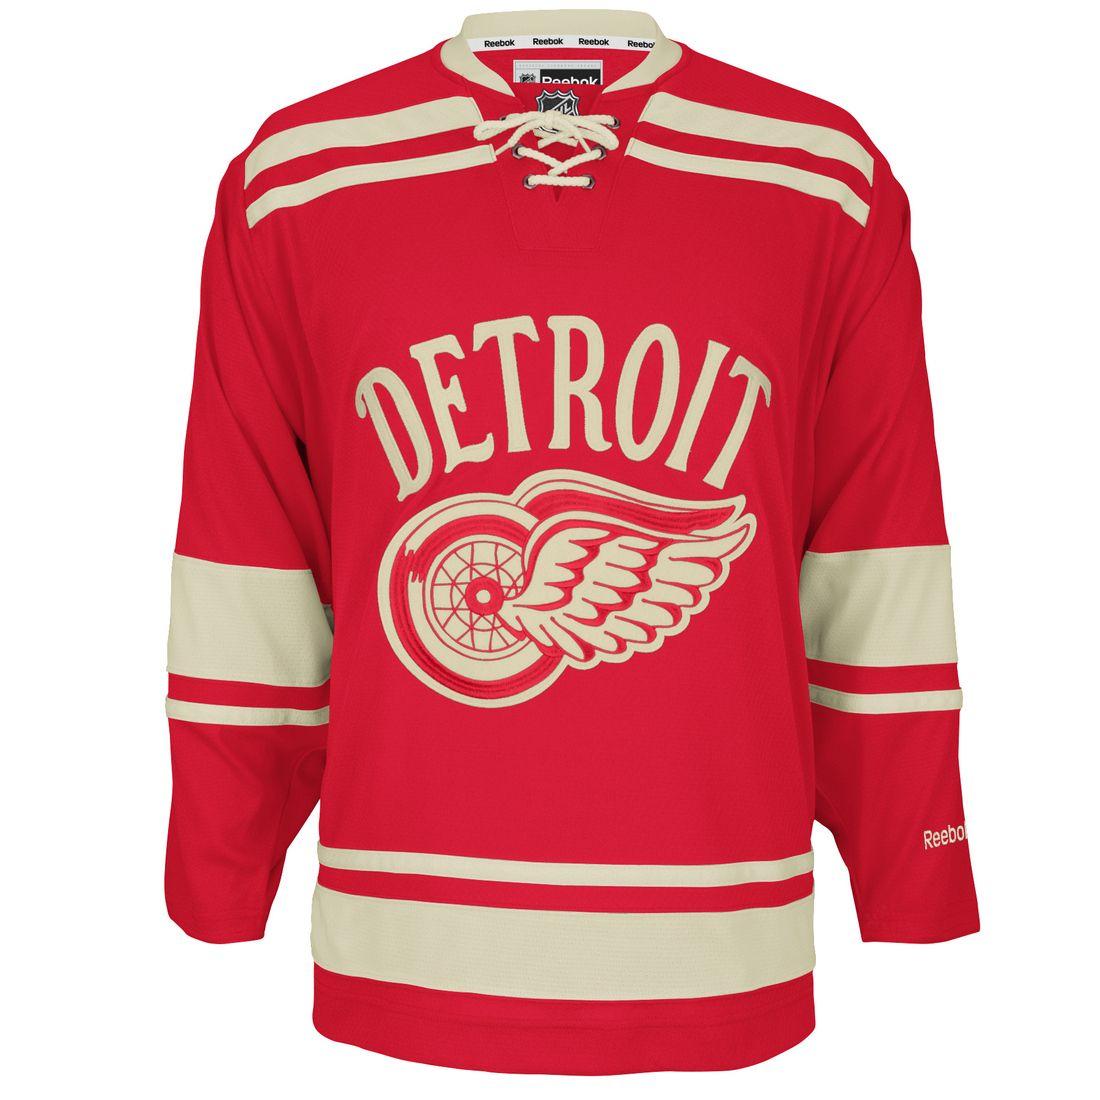 Classic Detroit Red Wings Logo - 507 Best Red Wings Stuff images | Detroit sports, Detroit Red Wings ...